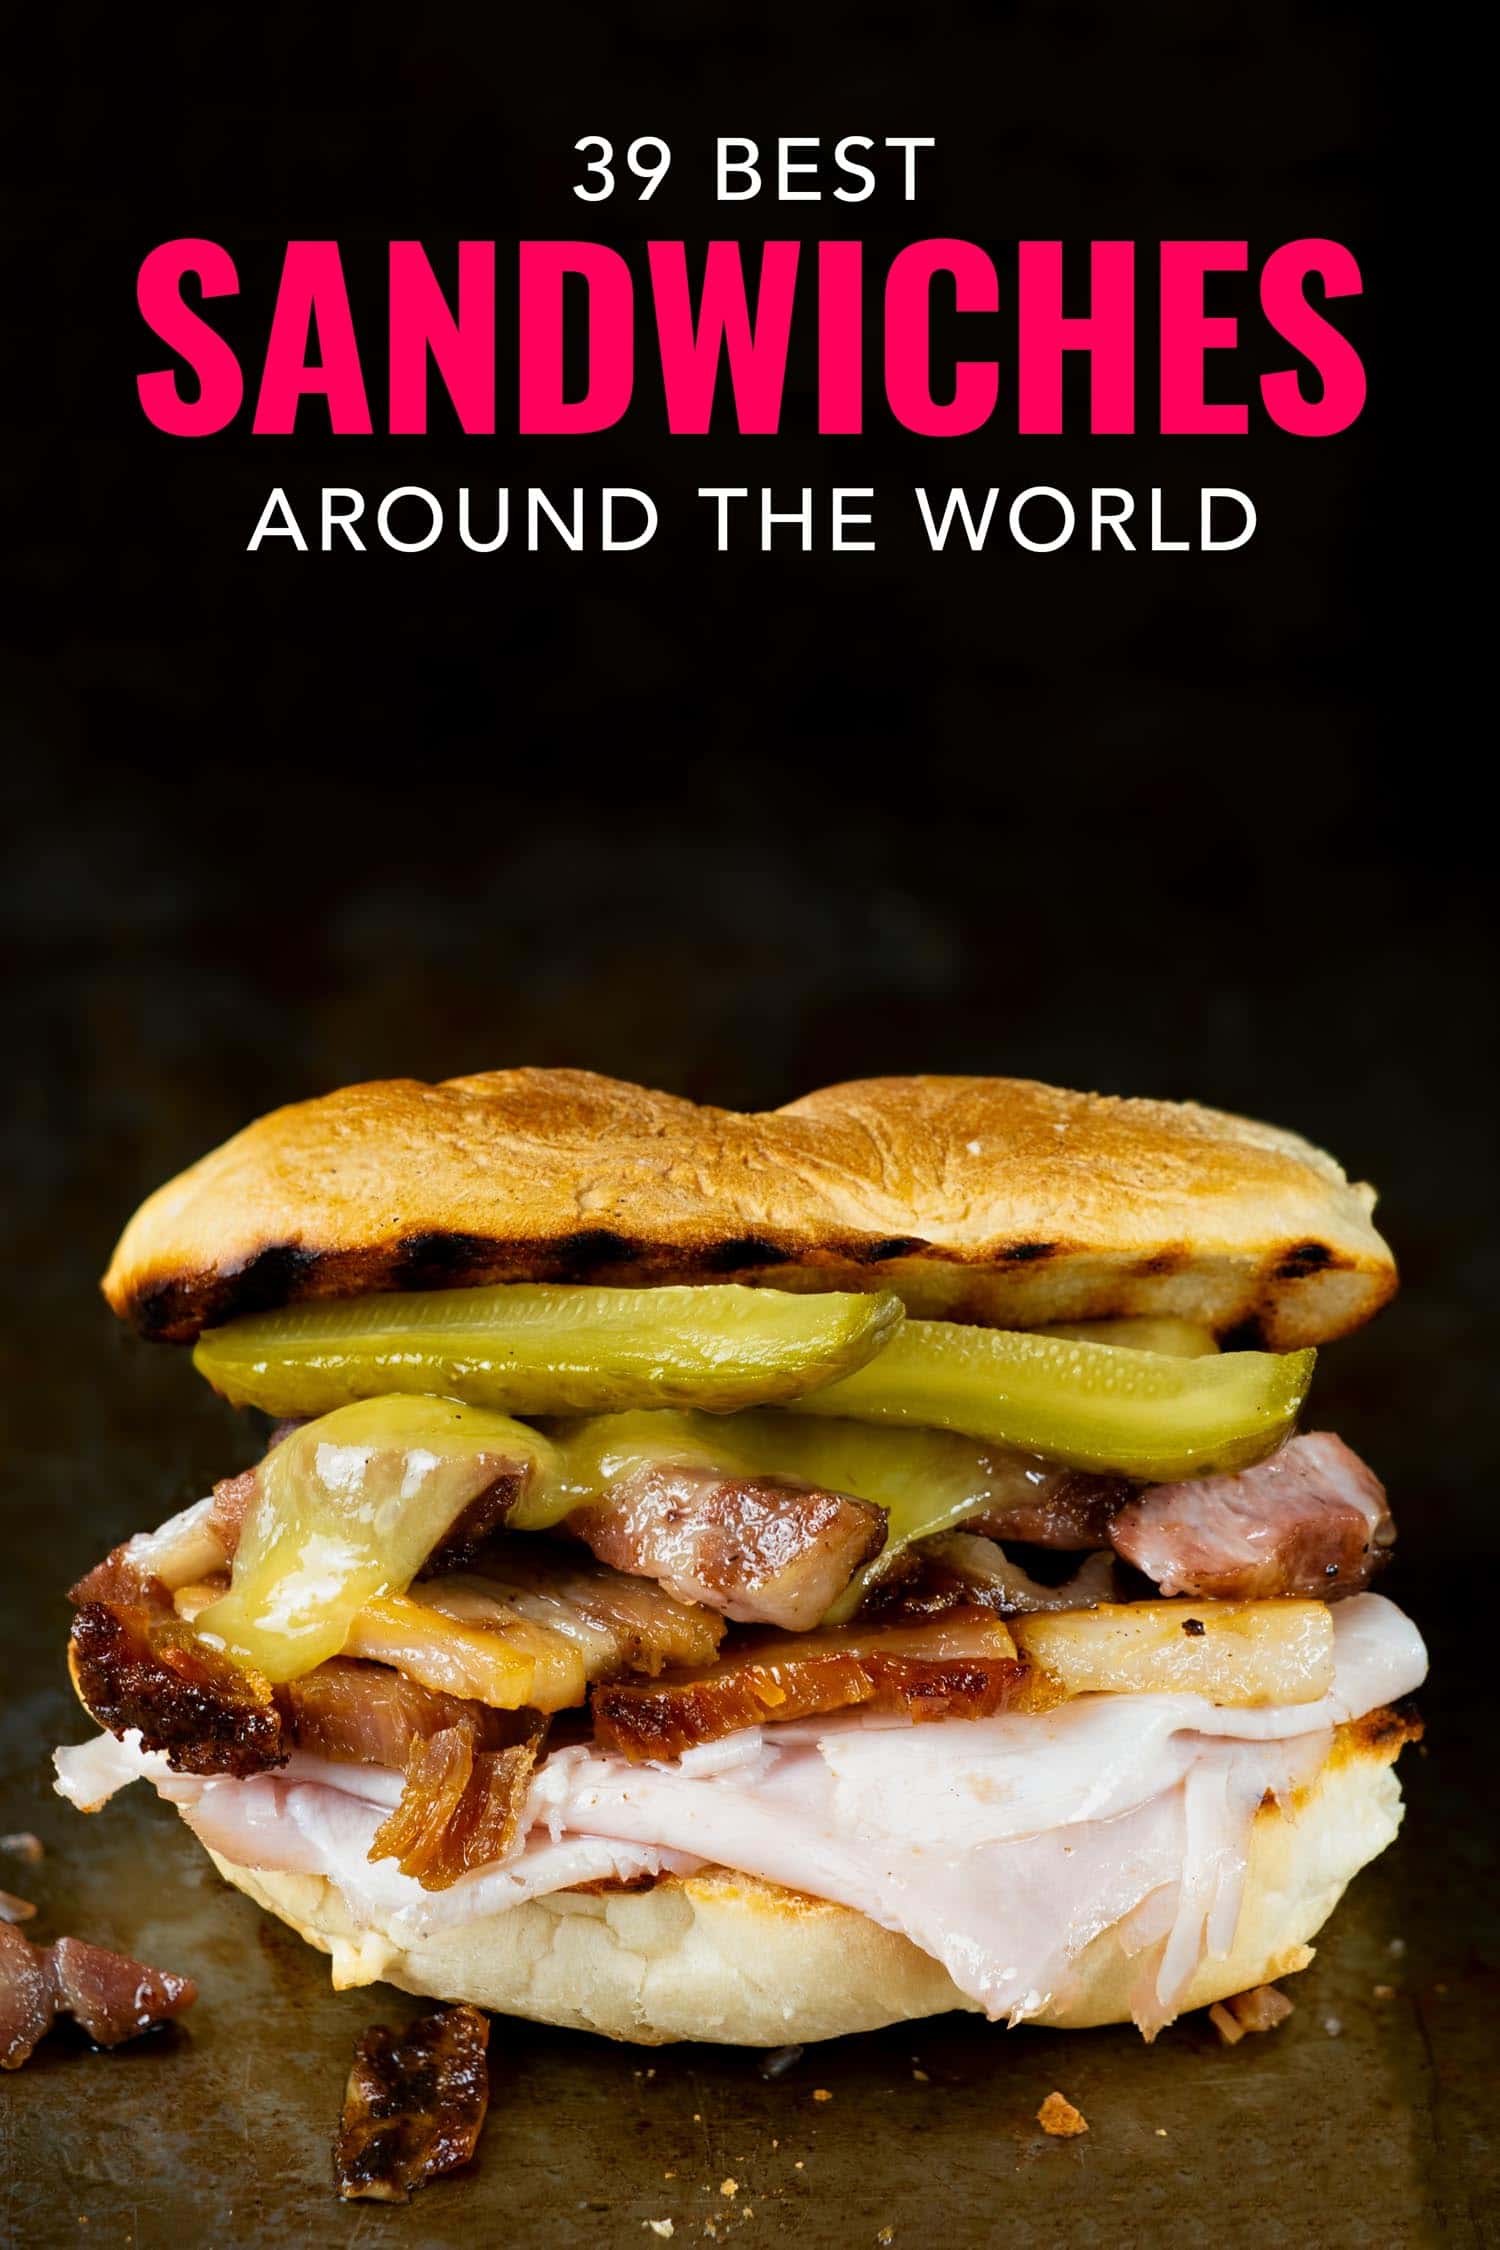 A cuban sandwich is one of the best sandwiches around the world